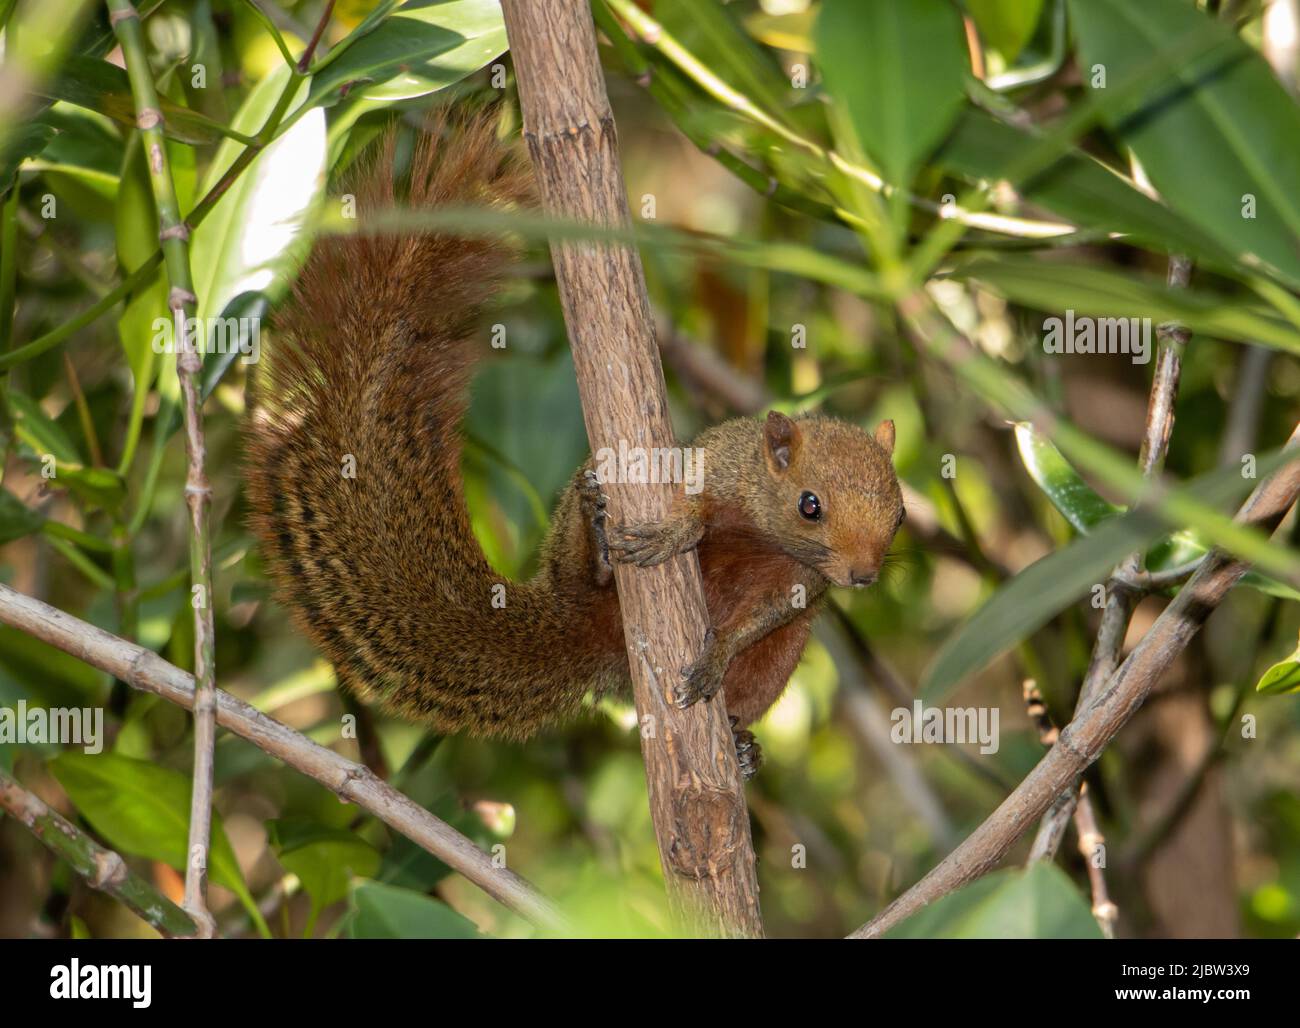 The red-bellied tree squirrel climbs on tree. Pallas's squirrel (Callosciurus erythraeus) in a tropical nature, Thailand. Stock Photo